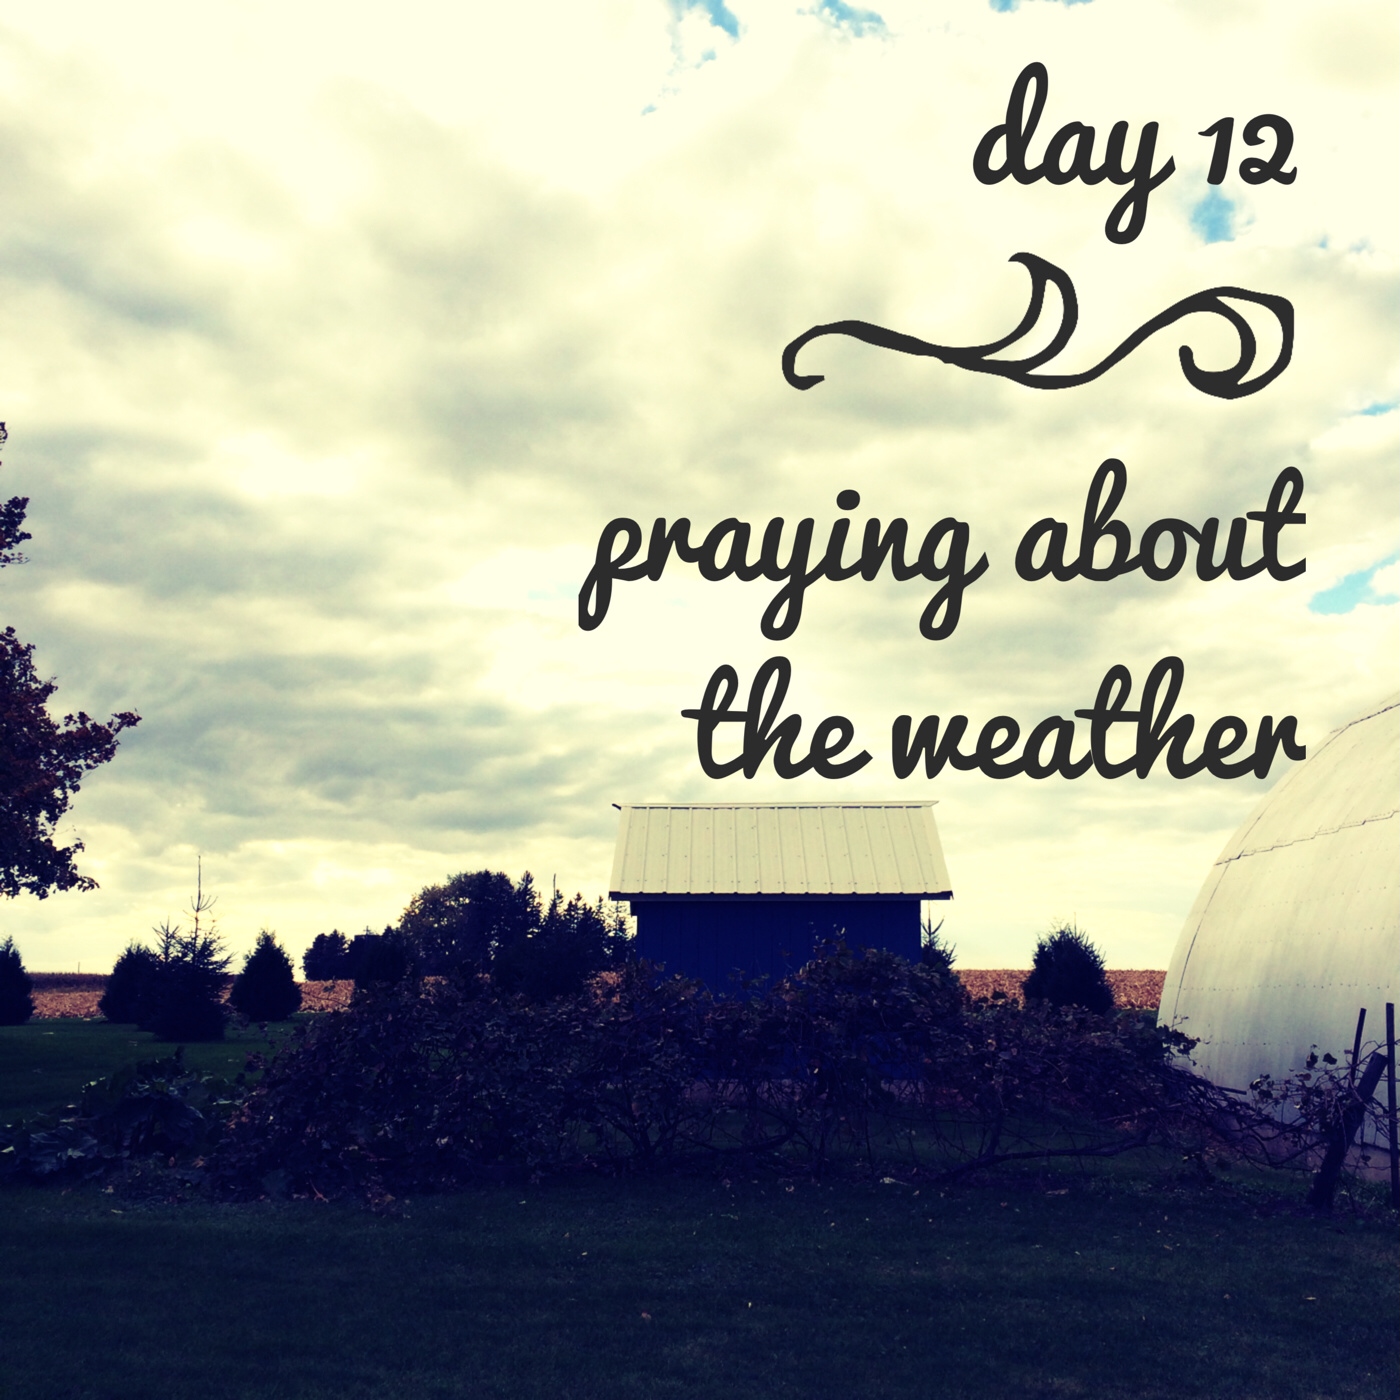 day 12 // pray about the weather